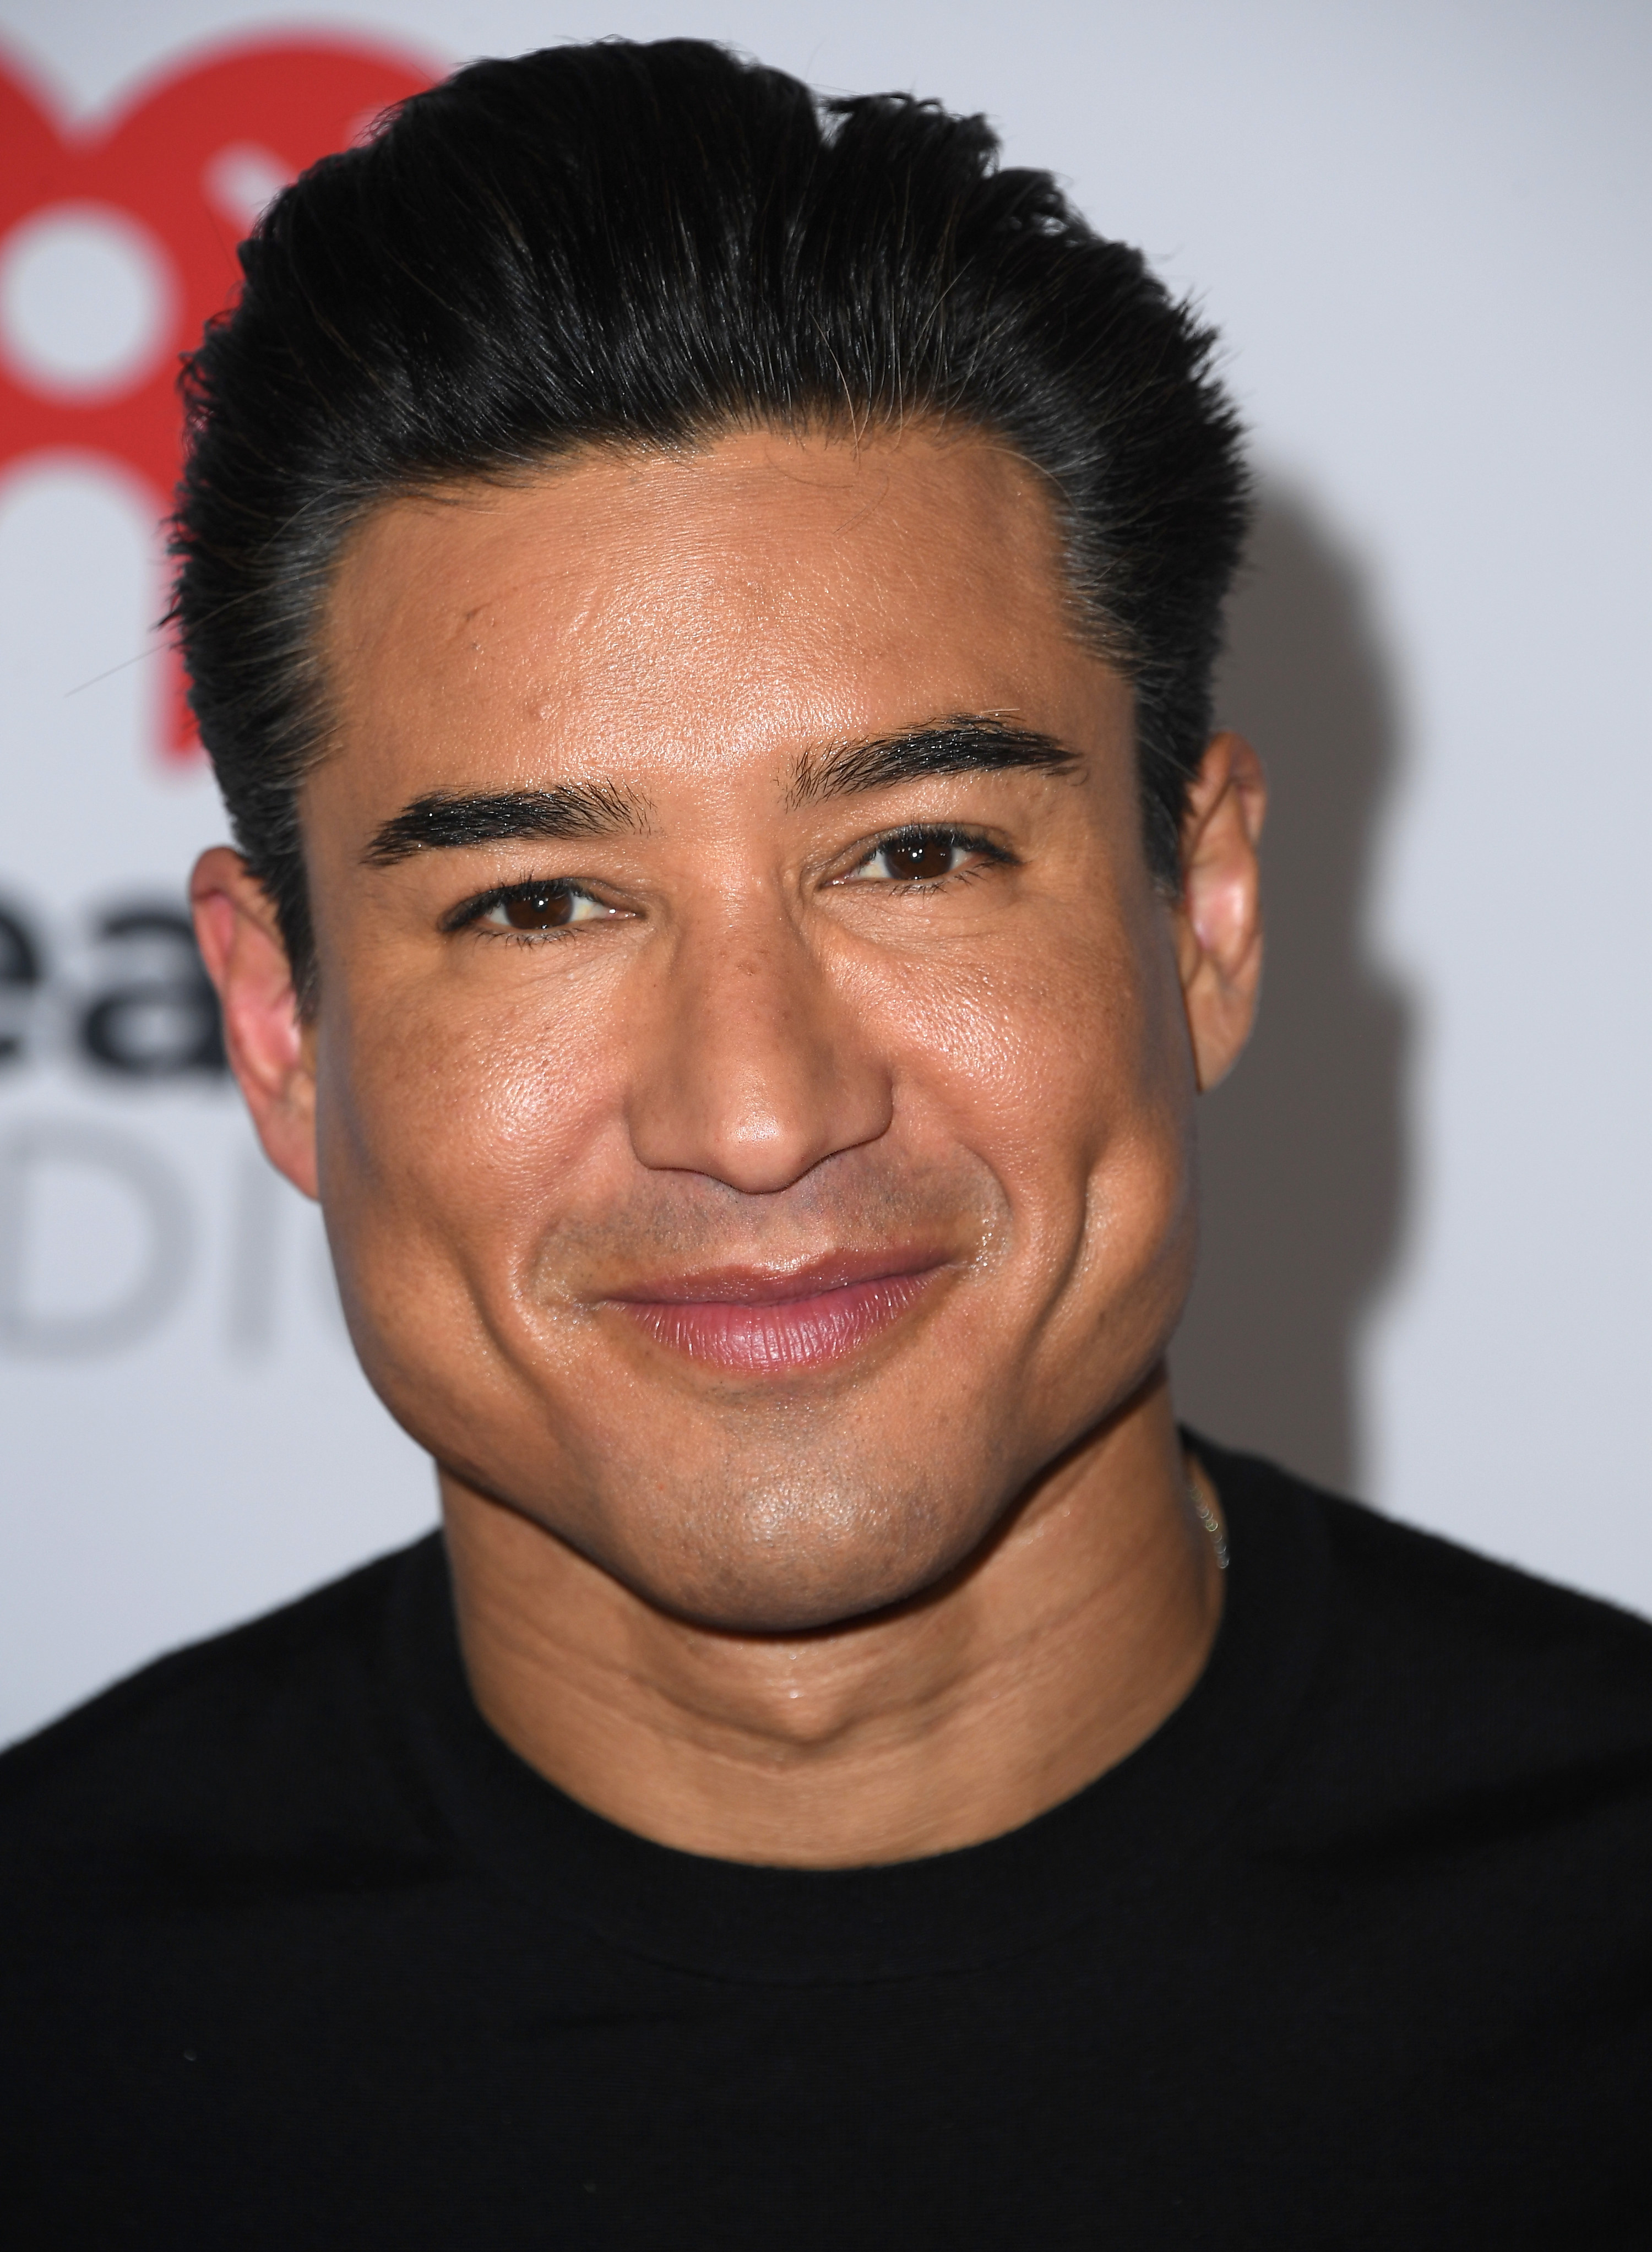 Mario Lopez in a black shirt on the red carpet in March of 2022